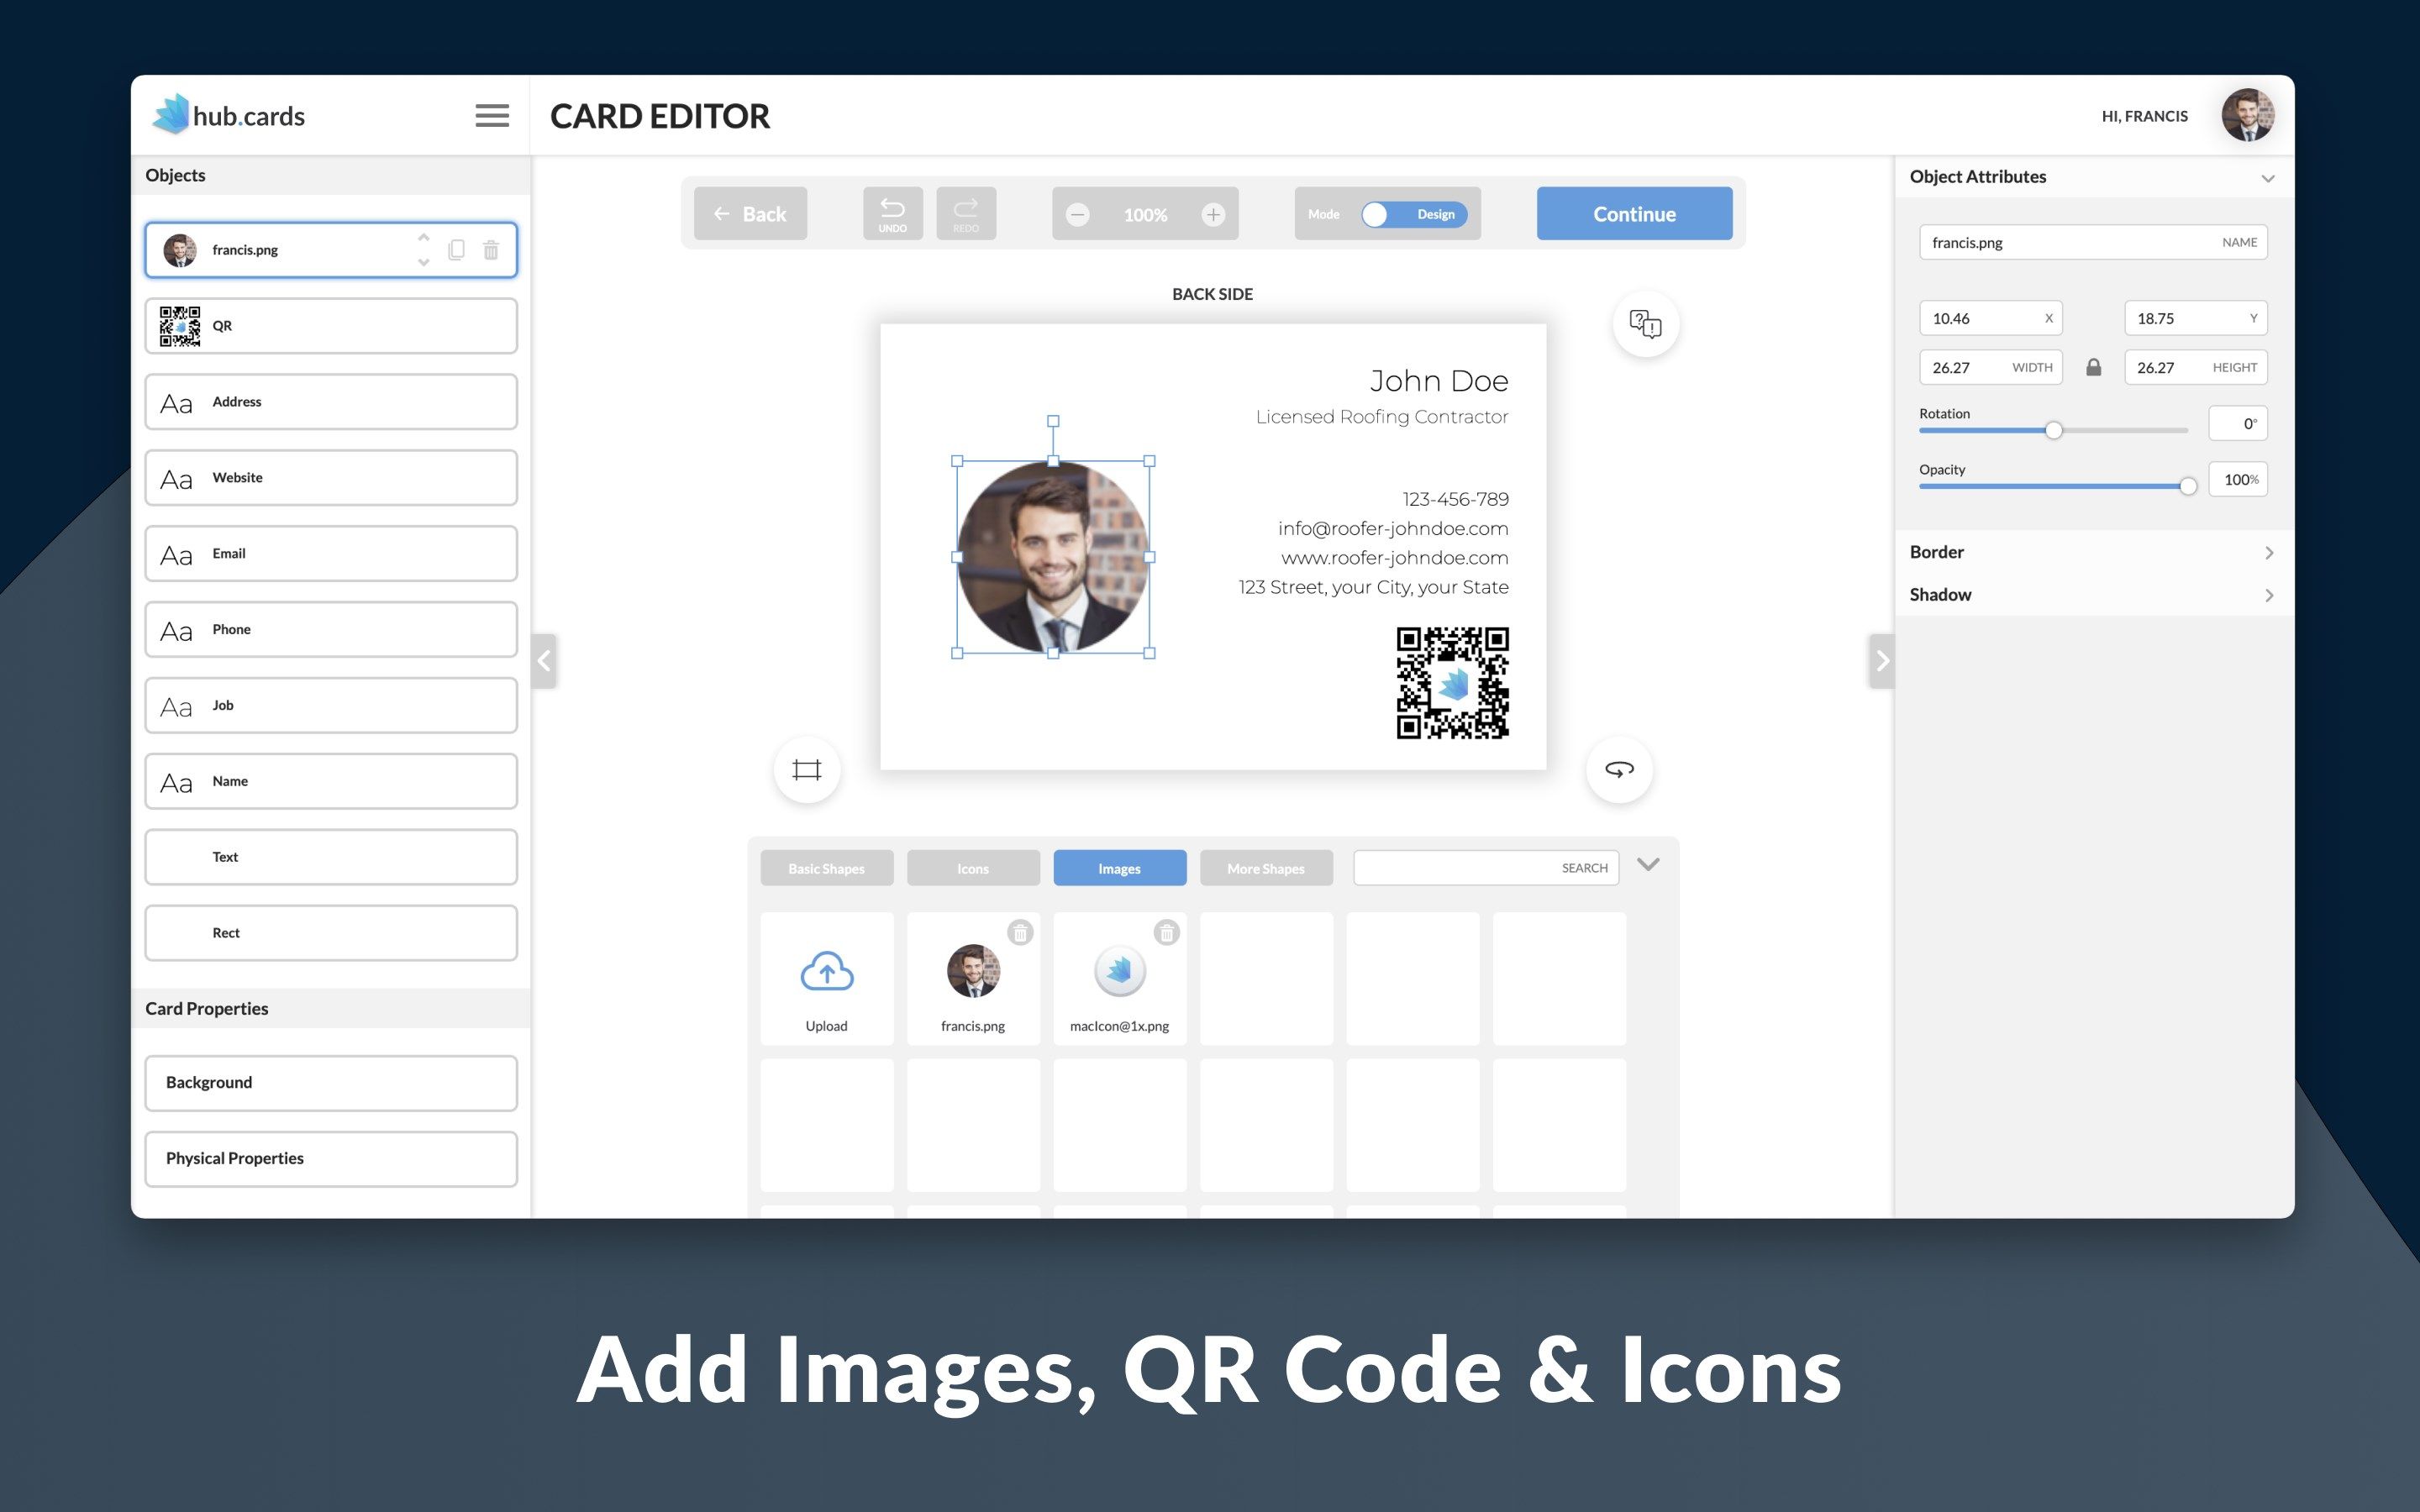 Add Images, QR-Code & Icons